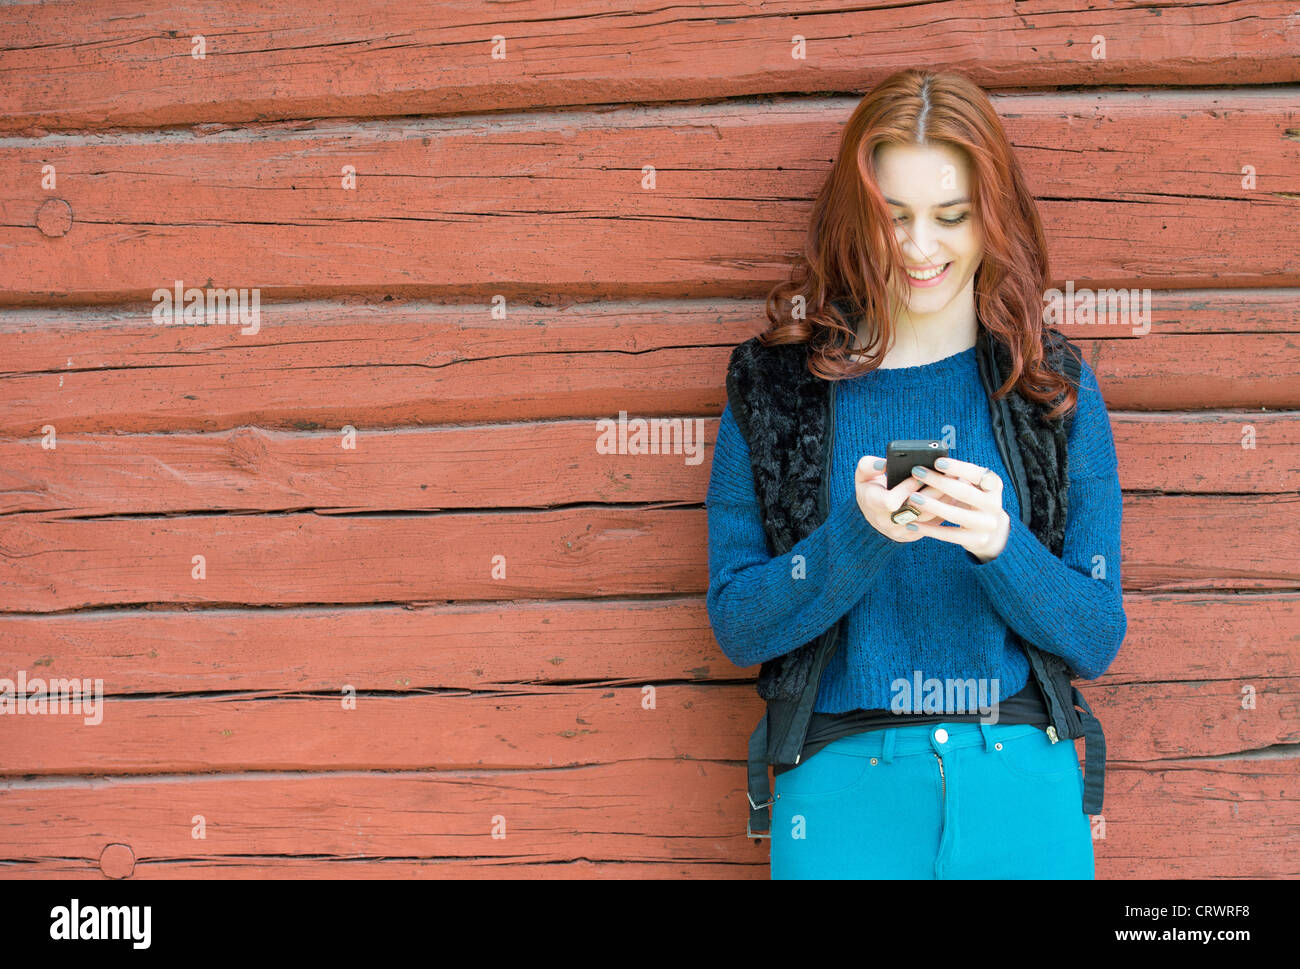 Young woman with red hair laughing and reading a text message on her phone Stock Photo